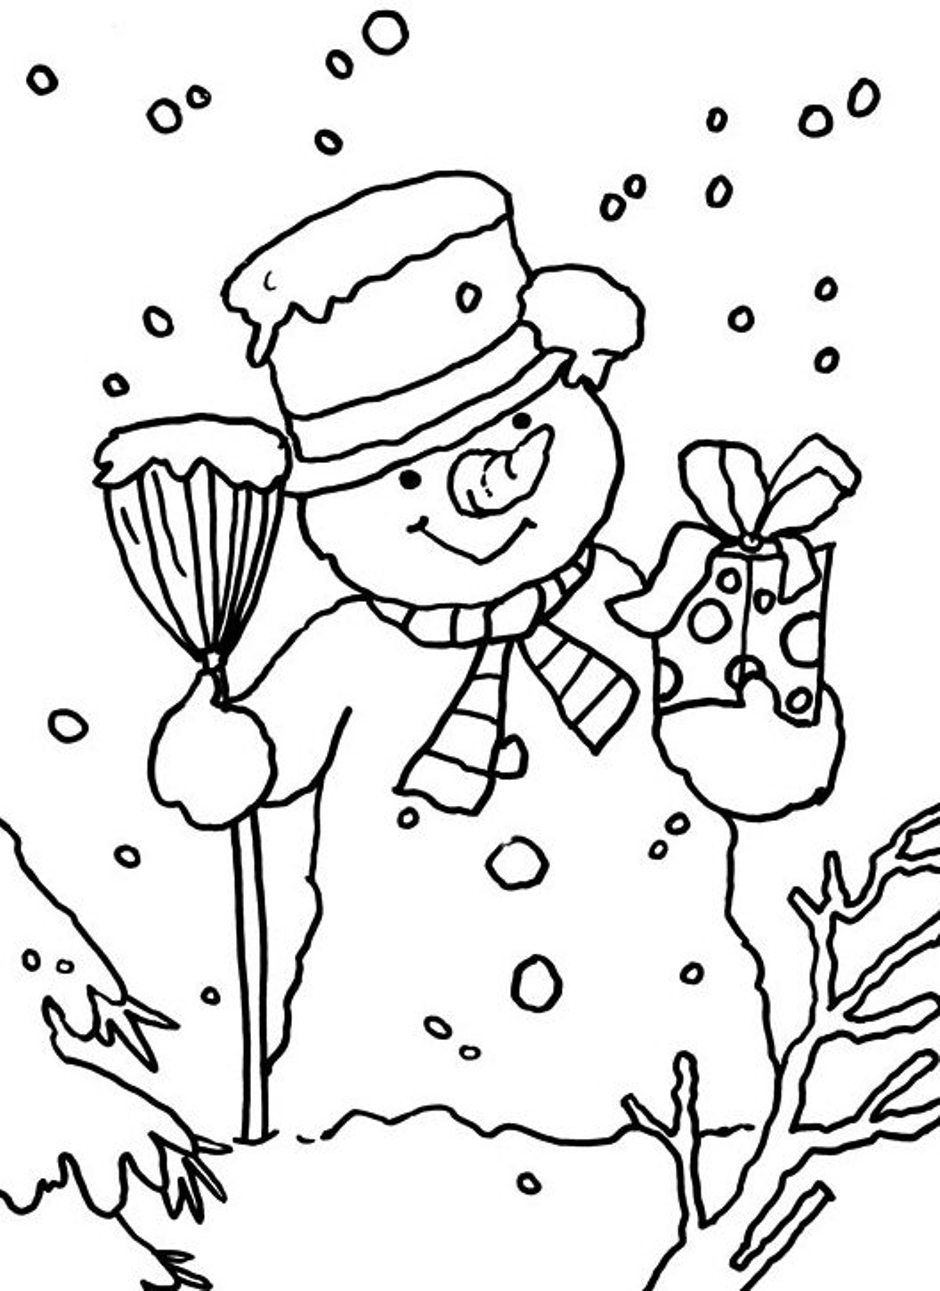 Snowman Coloring Sheets : Free Snowman Kid Coloring Pages ...